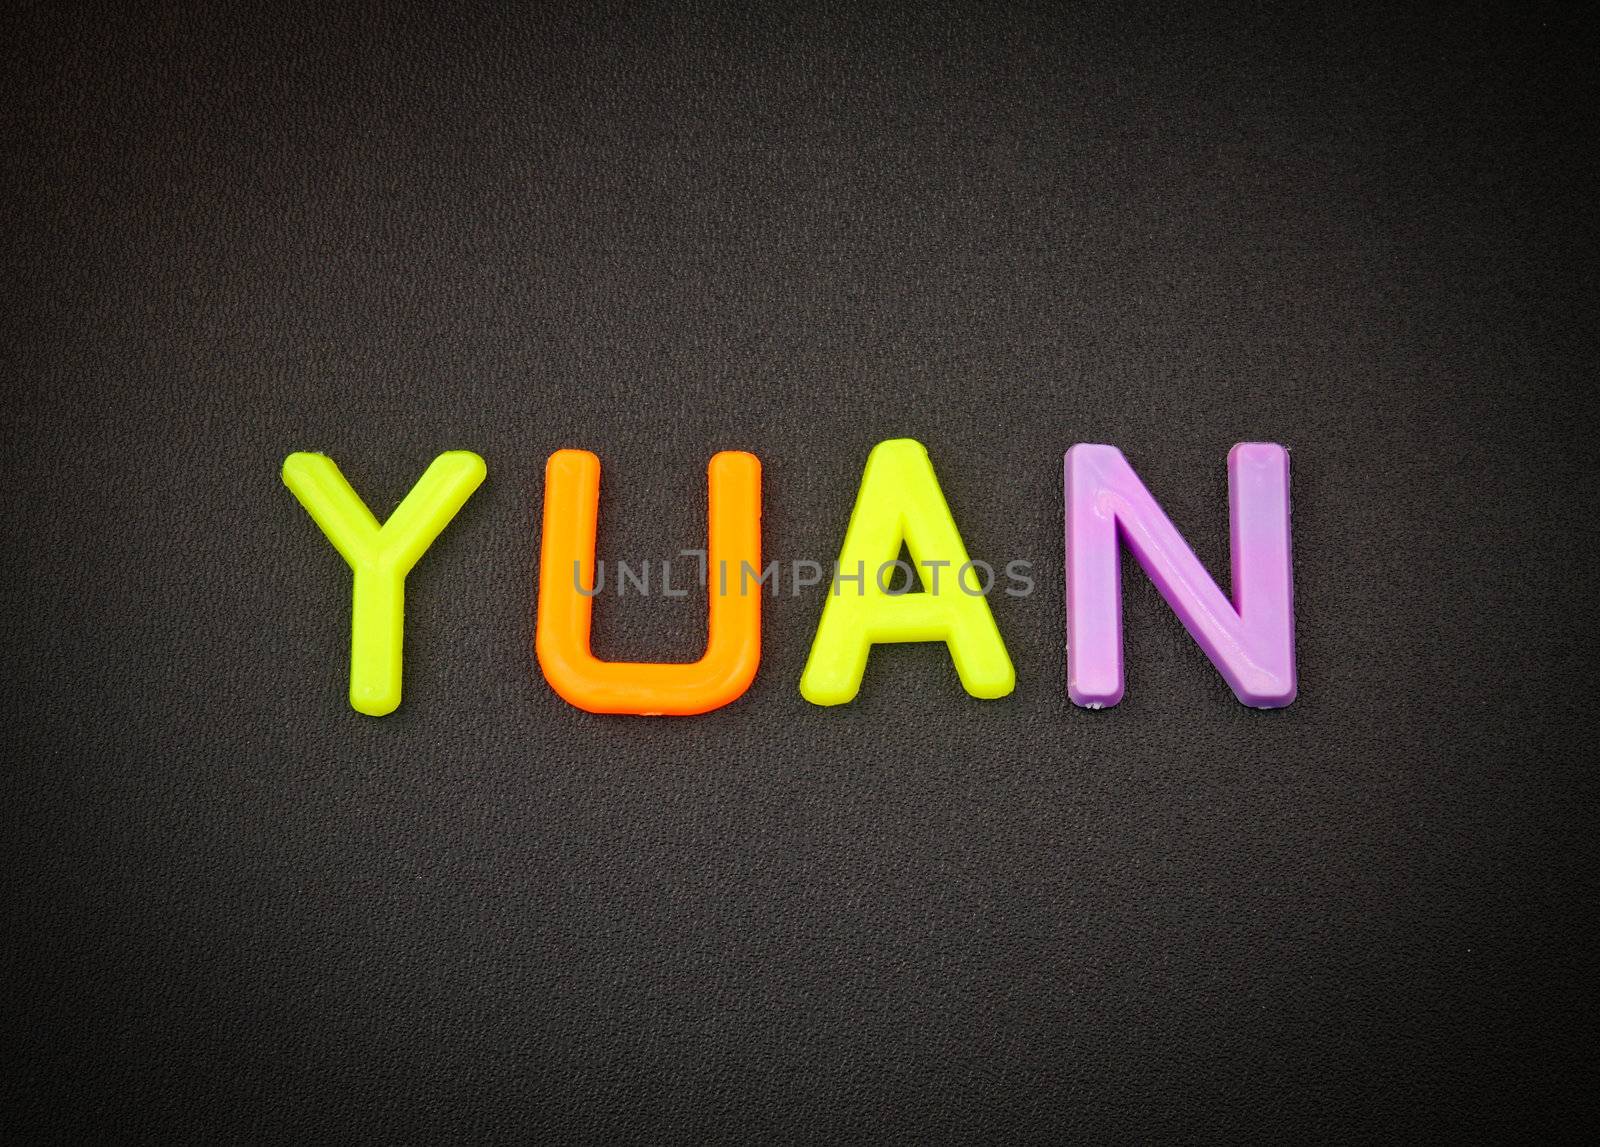 Yuan in colorful toy letters on black background by nuchylee